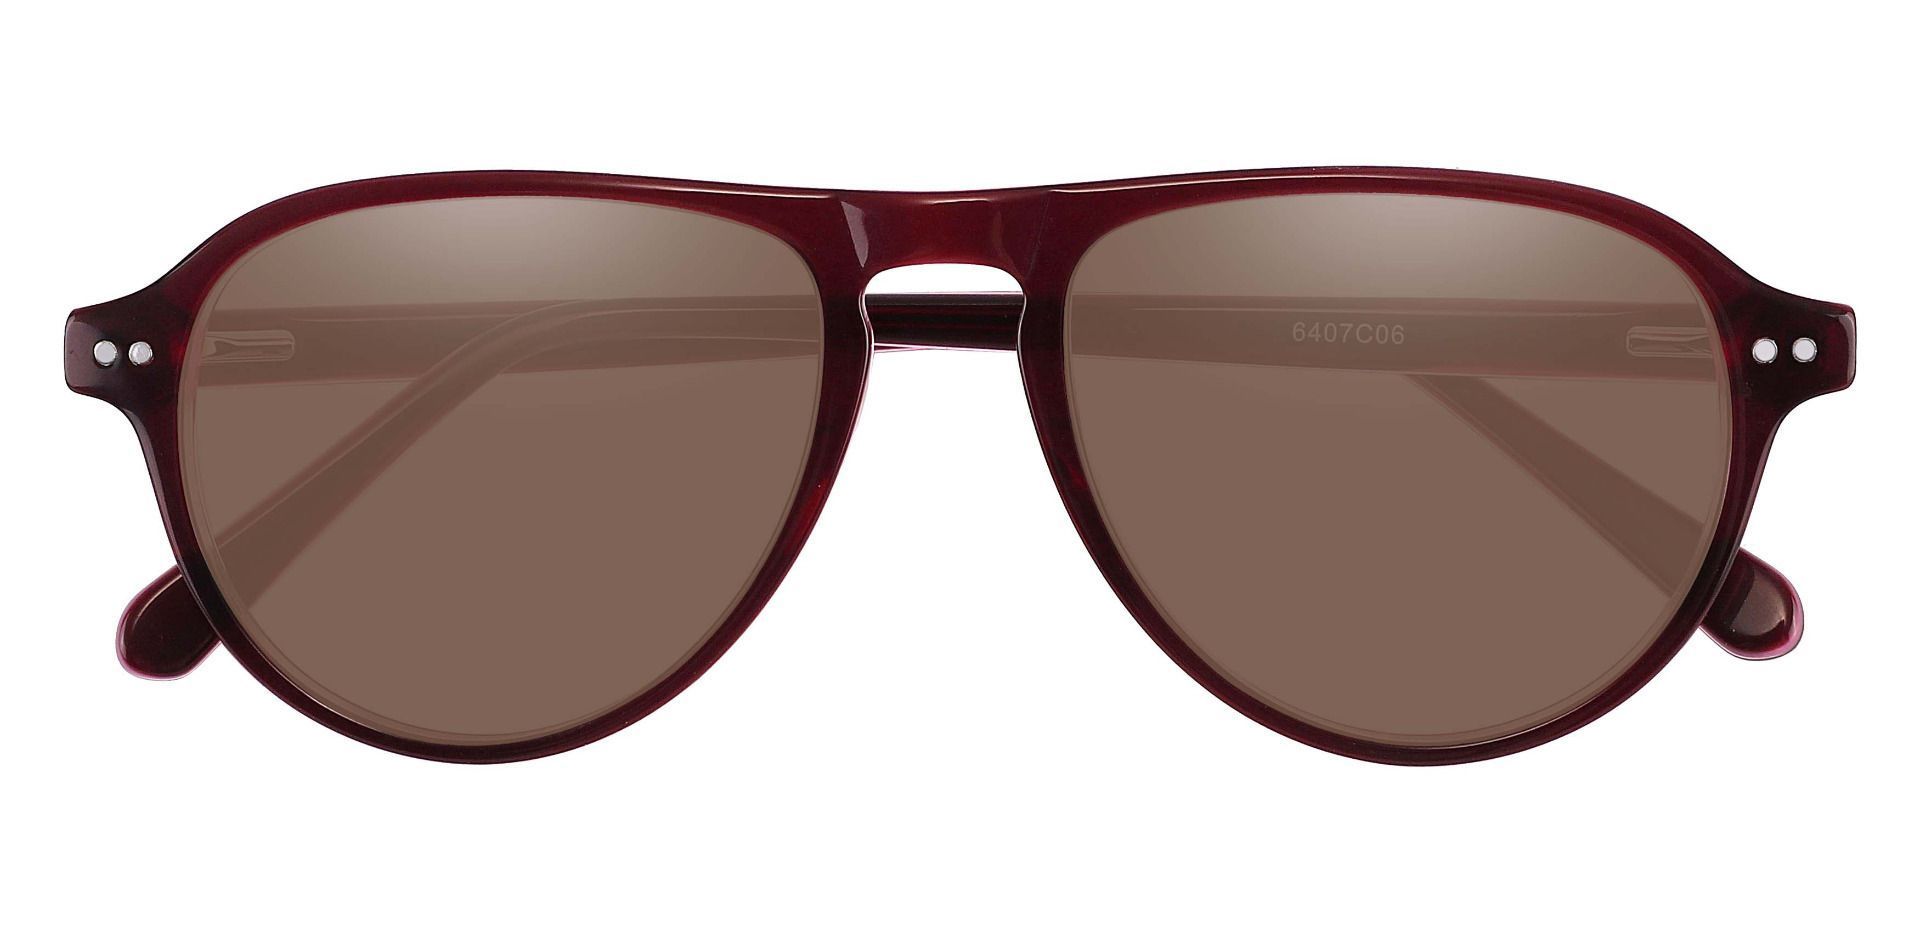 Durham Aviator Lined Bifocal Sunglasses - Purple Frame With Brown Lenses